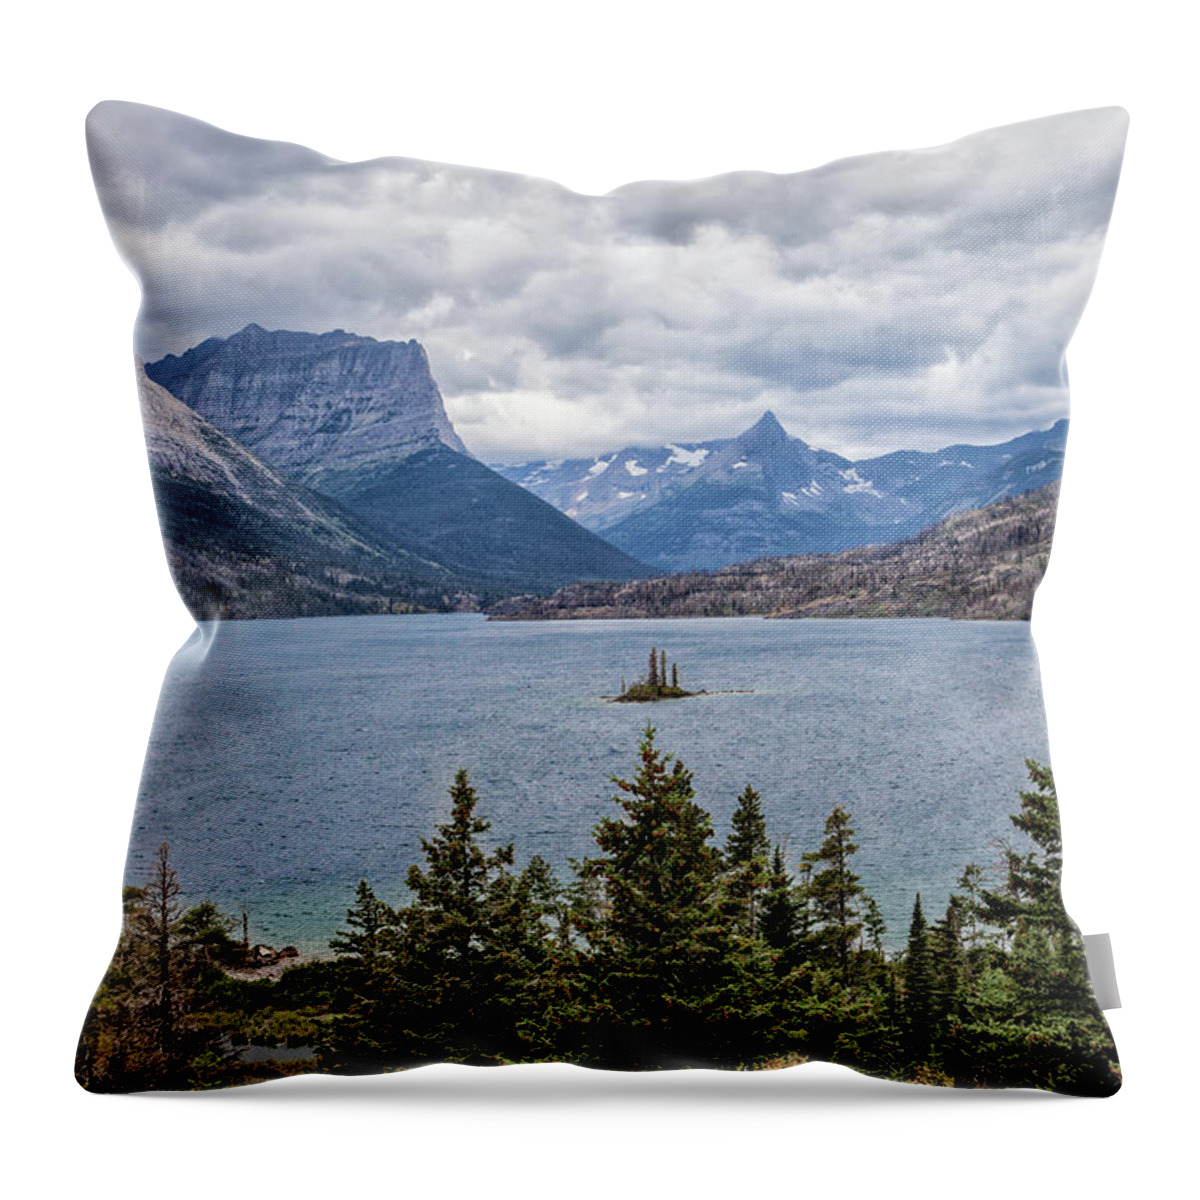 Canyon Throw Pillow featuring the photograph Wild Goose Island by Ronald Lutz